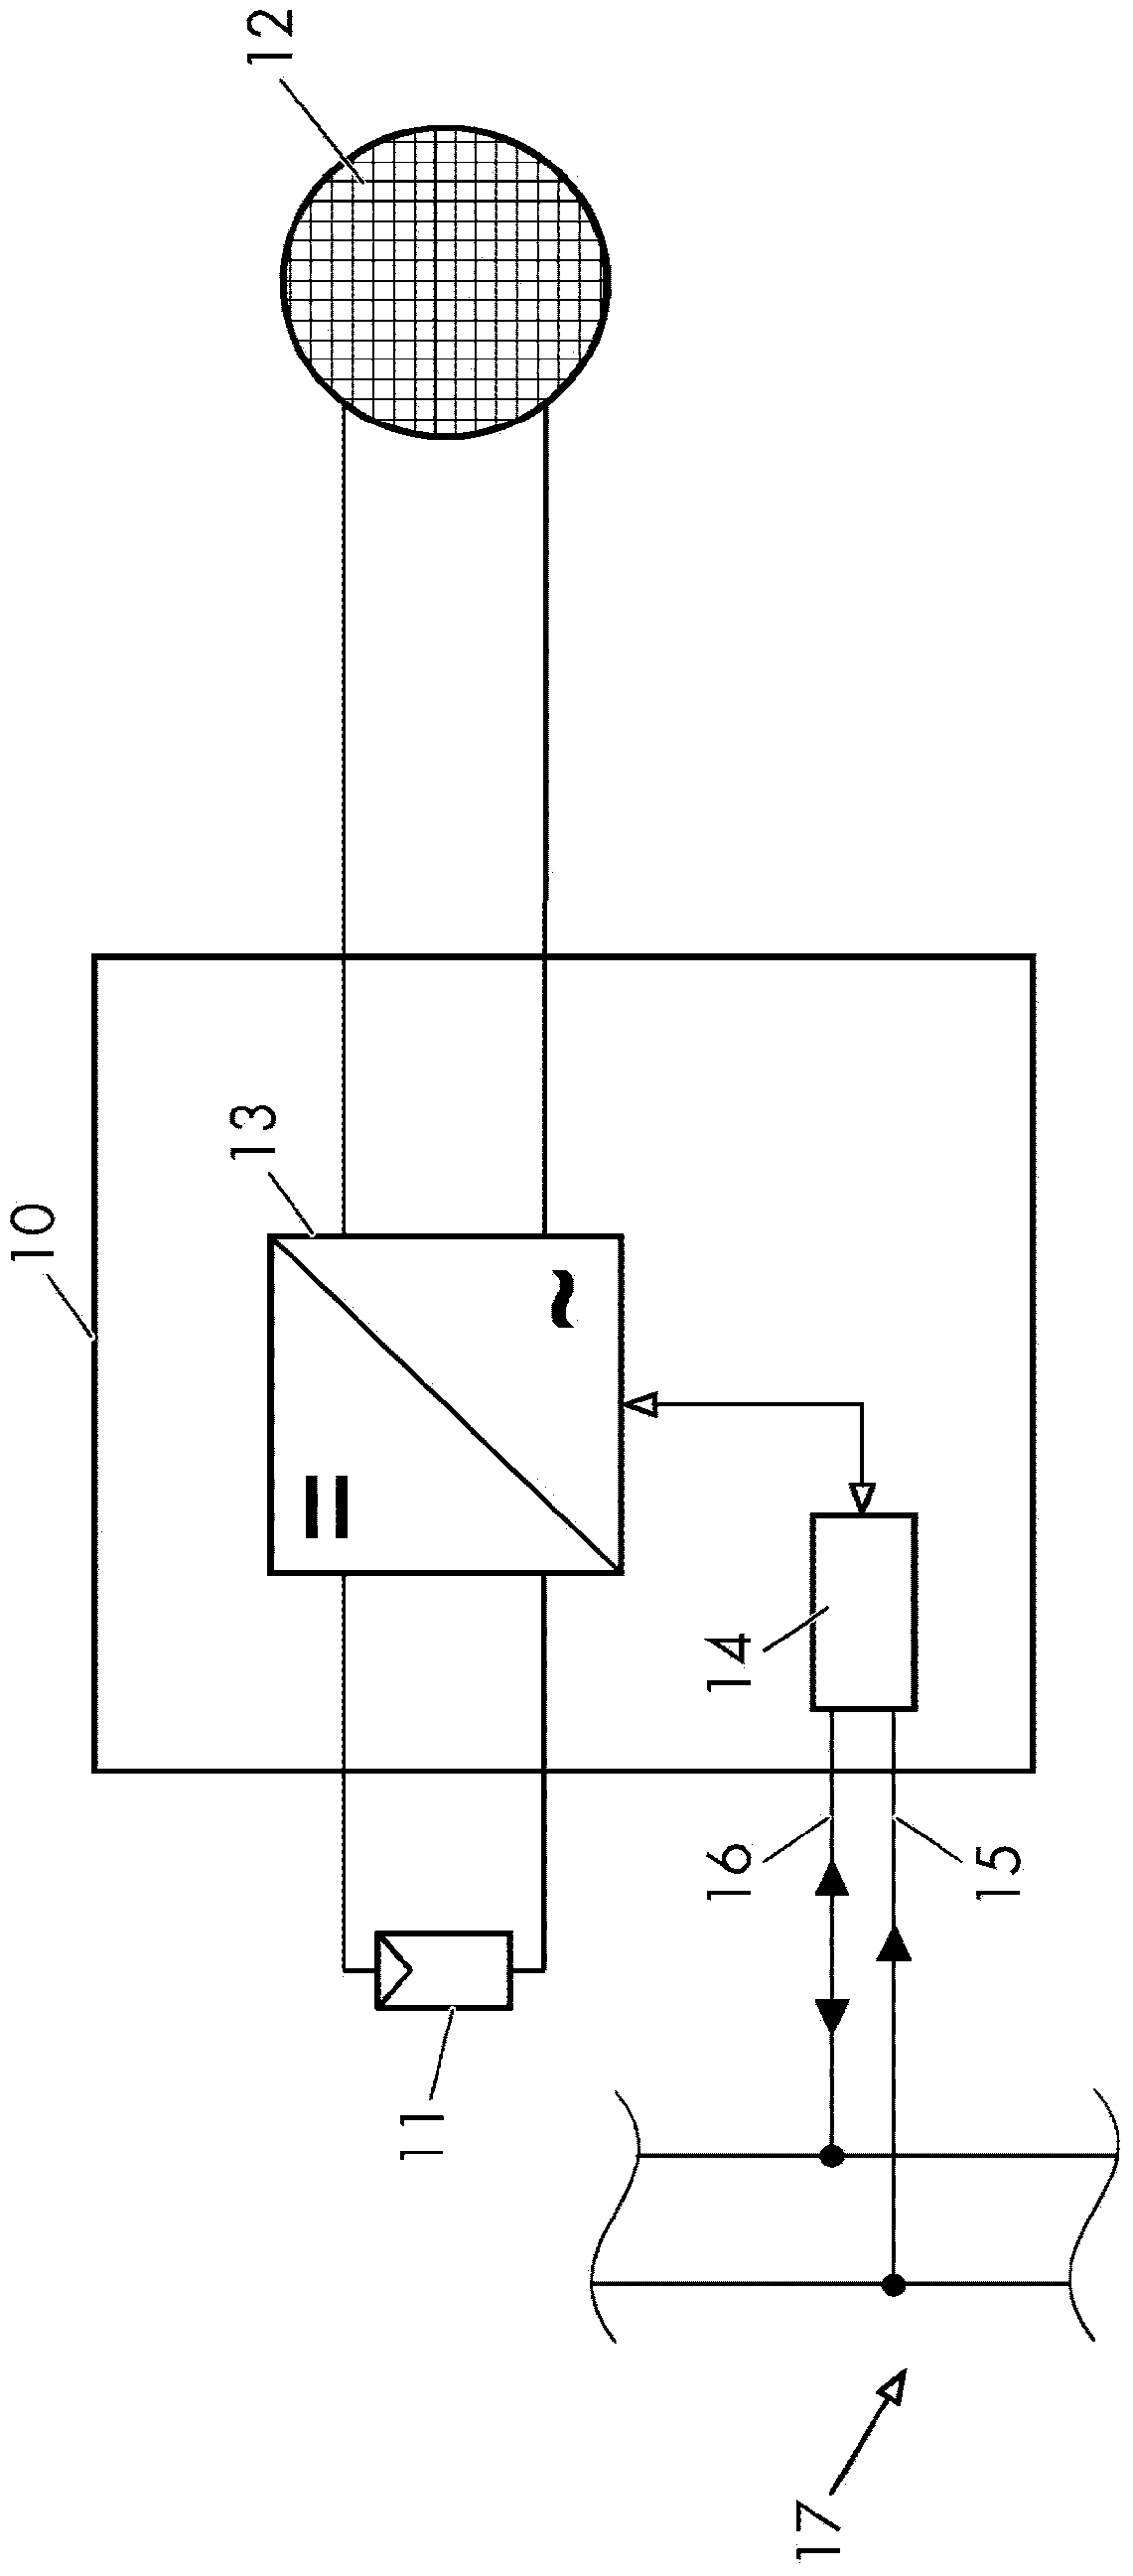 Inverter and method for converting dc power from a generator to grid compatible ac power